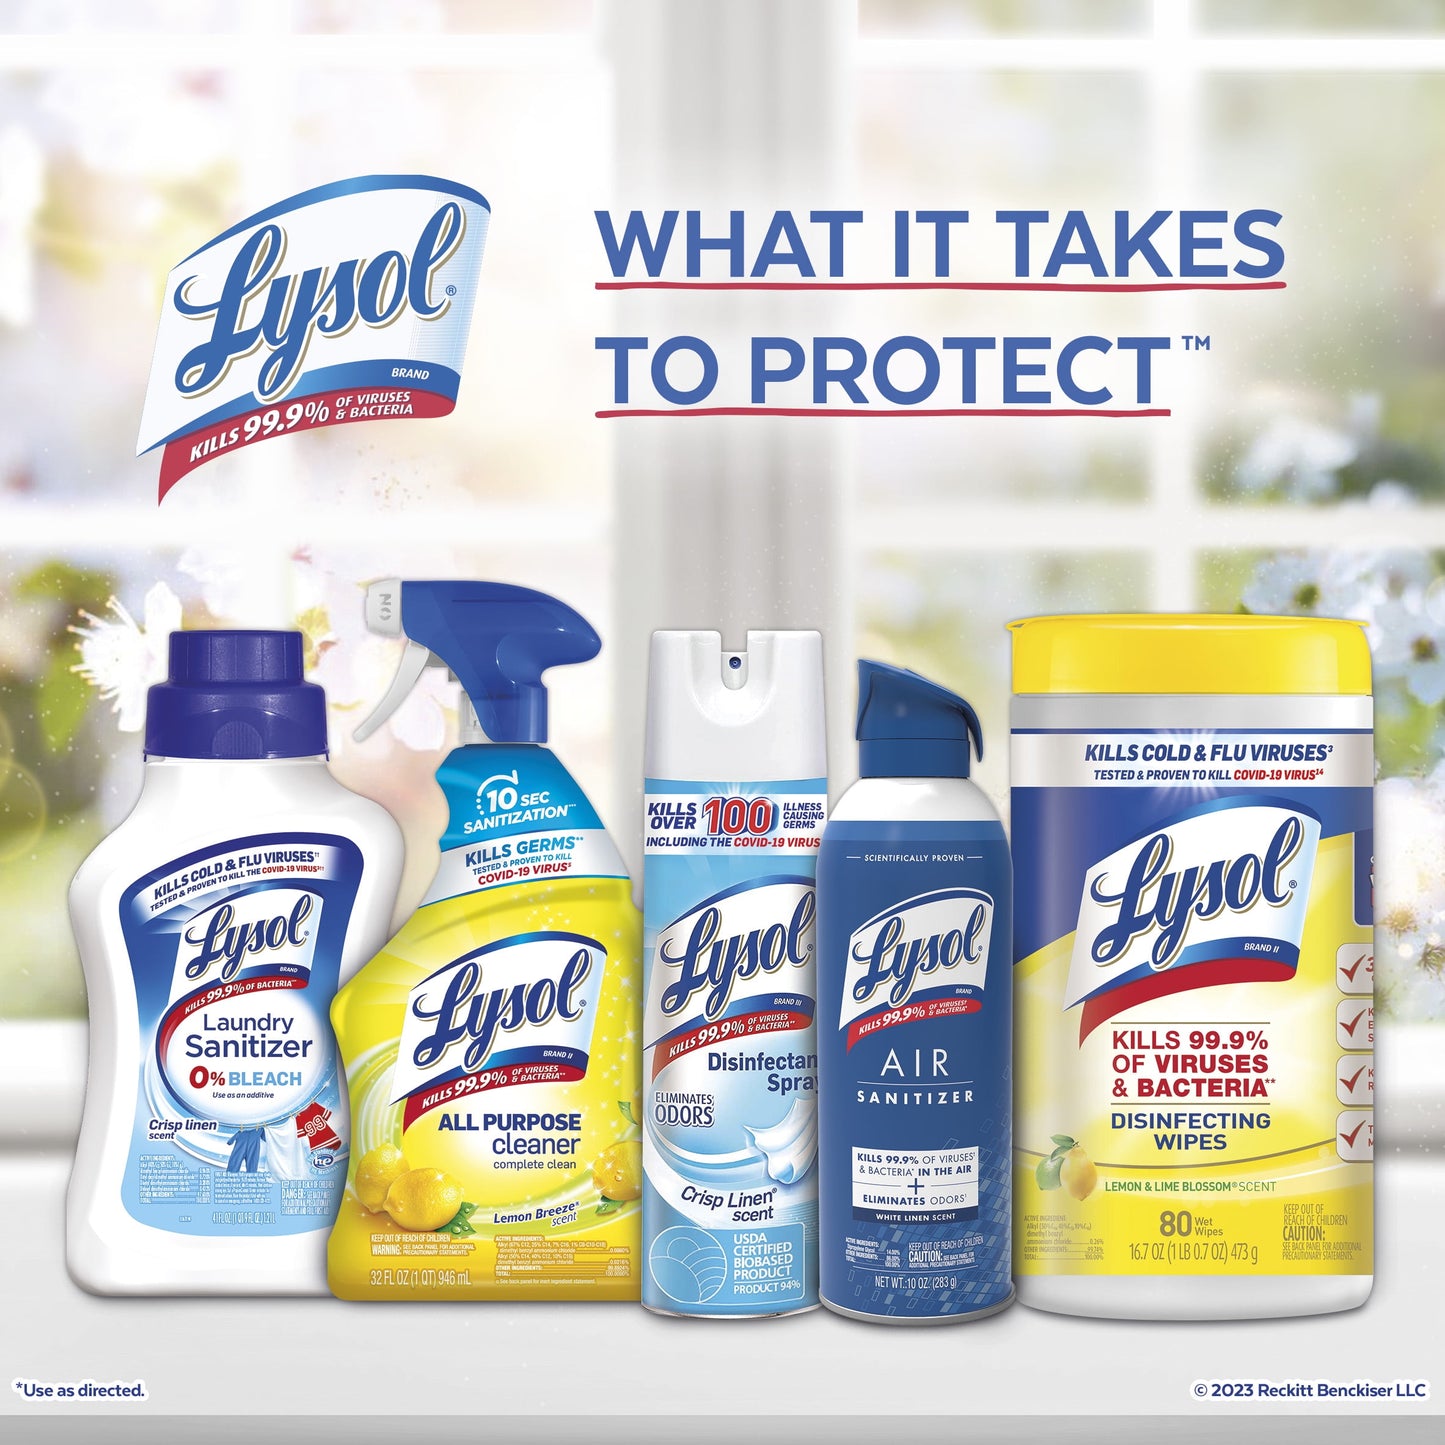 Lysol Disinfectant Wipes Bundle, Multi-Surface Antibacterial Cleaning Wipes, For Disinfecting & Cleaning, contains x2 Lemon & Lime Blossom (160ct) x1 Crisp Linen (80ct) & x1 Mango & Hibiscus (80ct)